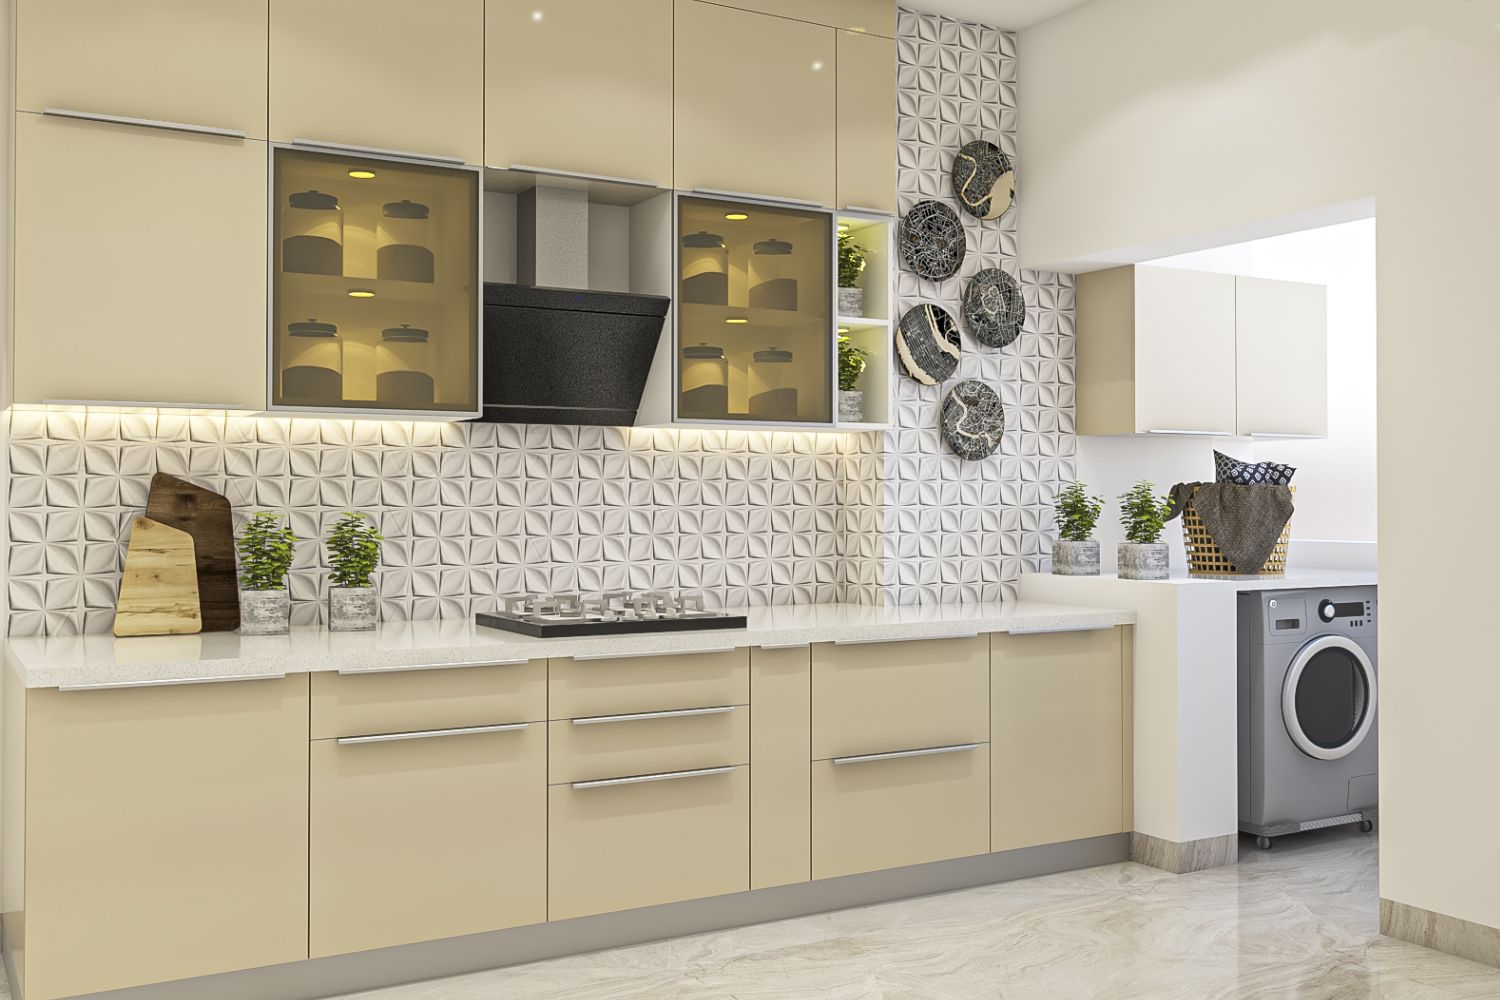 Modern Modular Parallel Kitchen Cabinet Design With 3D Dado Tiles And Light Yellow Cabinets